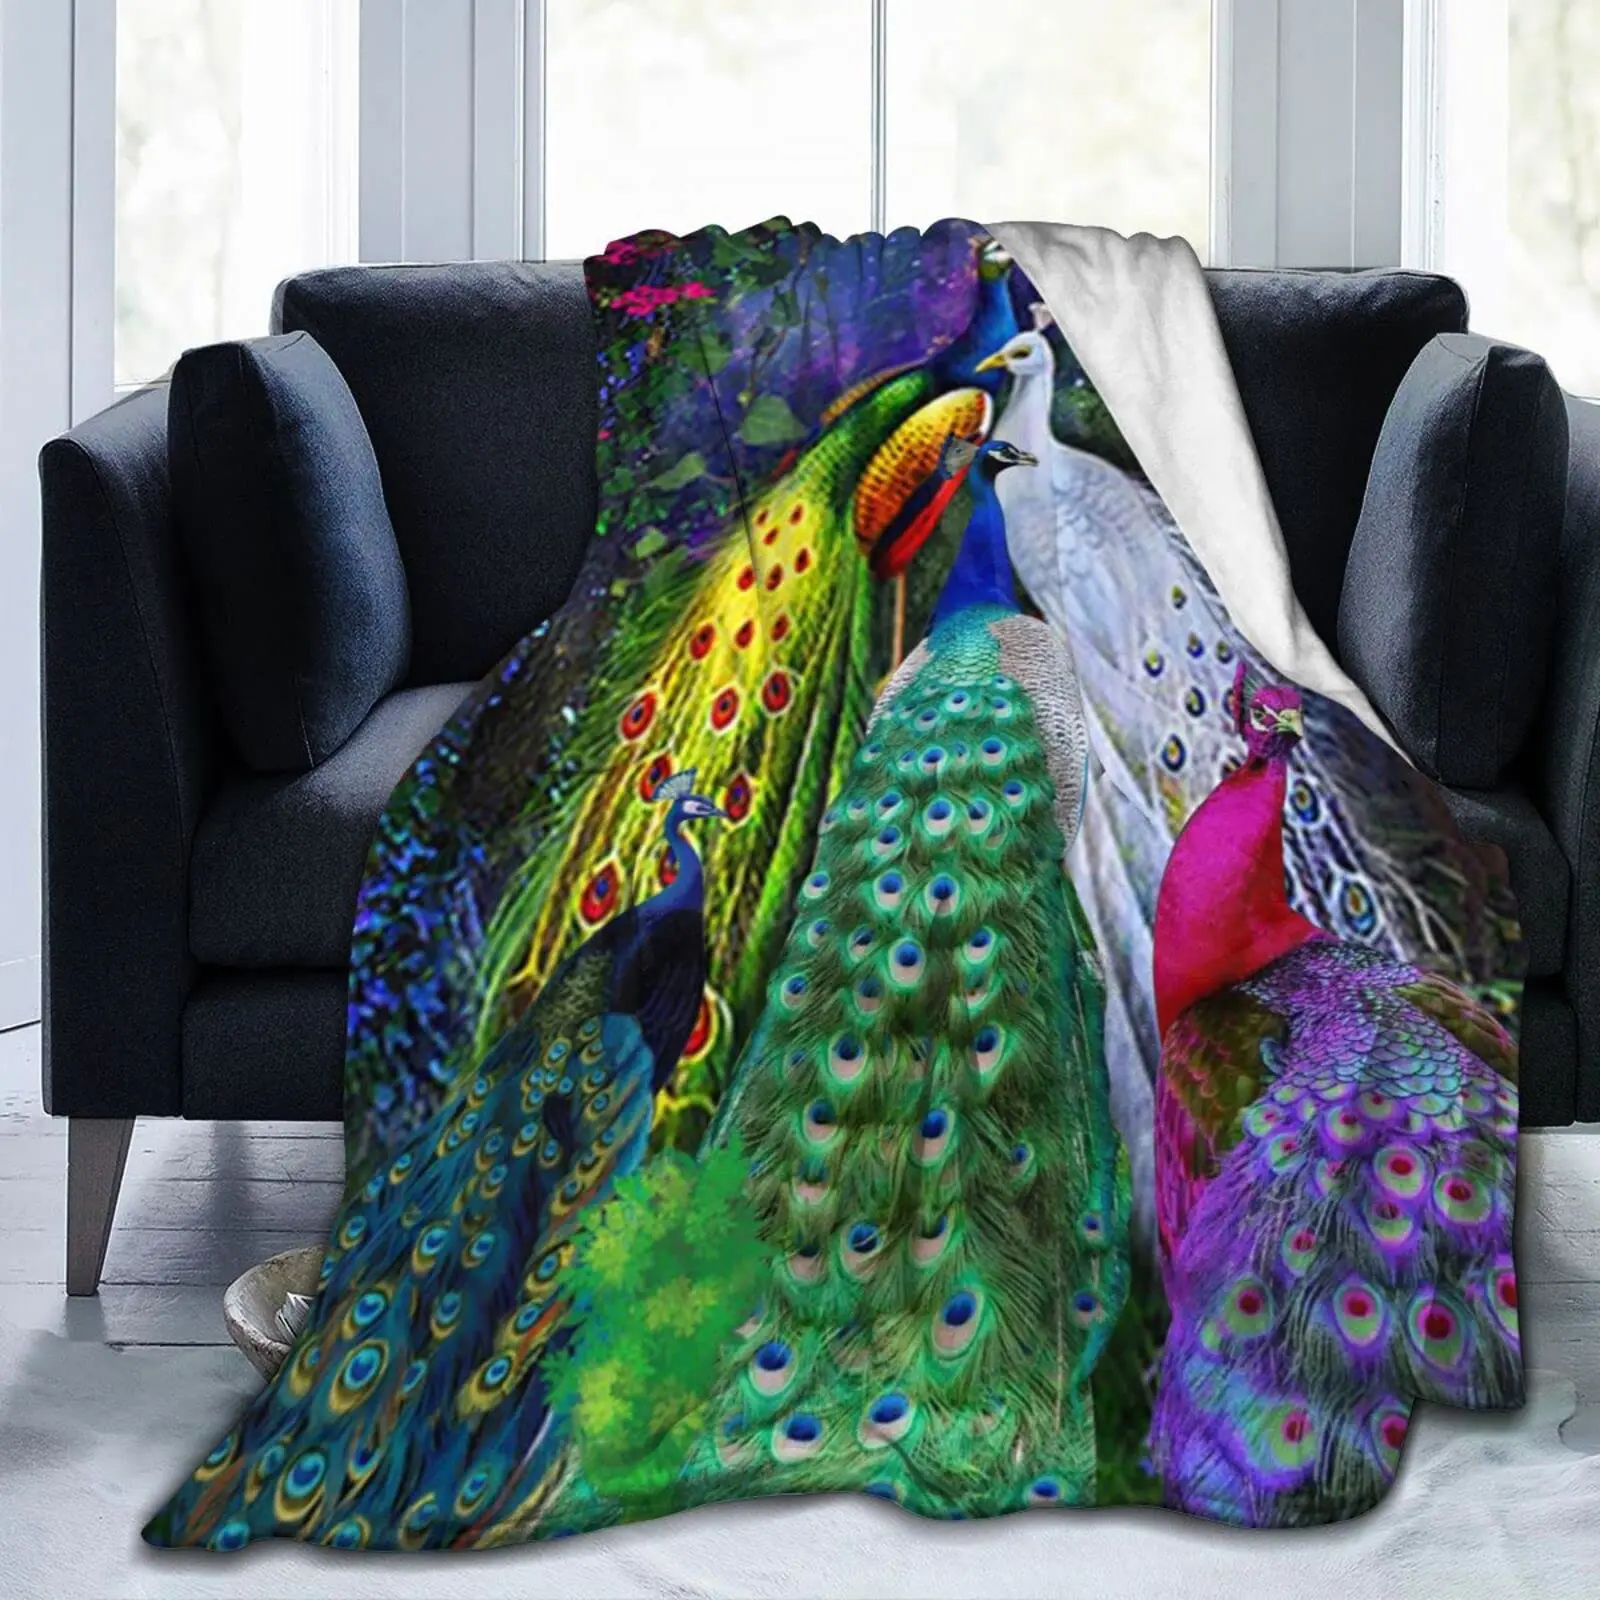 

Flannel Throw Blanket Colorful Decor Soft Cozy Sofa Couch Bed Office Camping for Kids Women Adults Gifts Peacock Themed Pattern